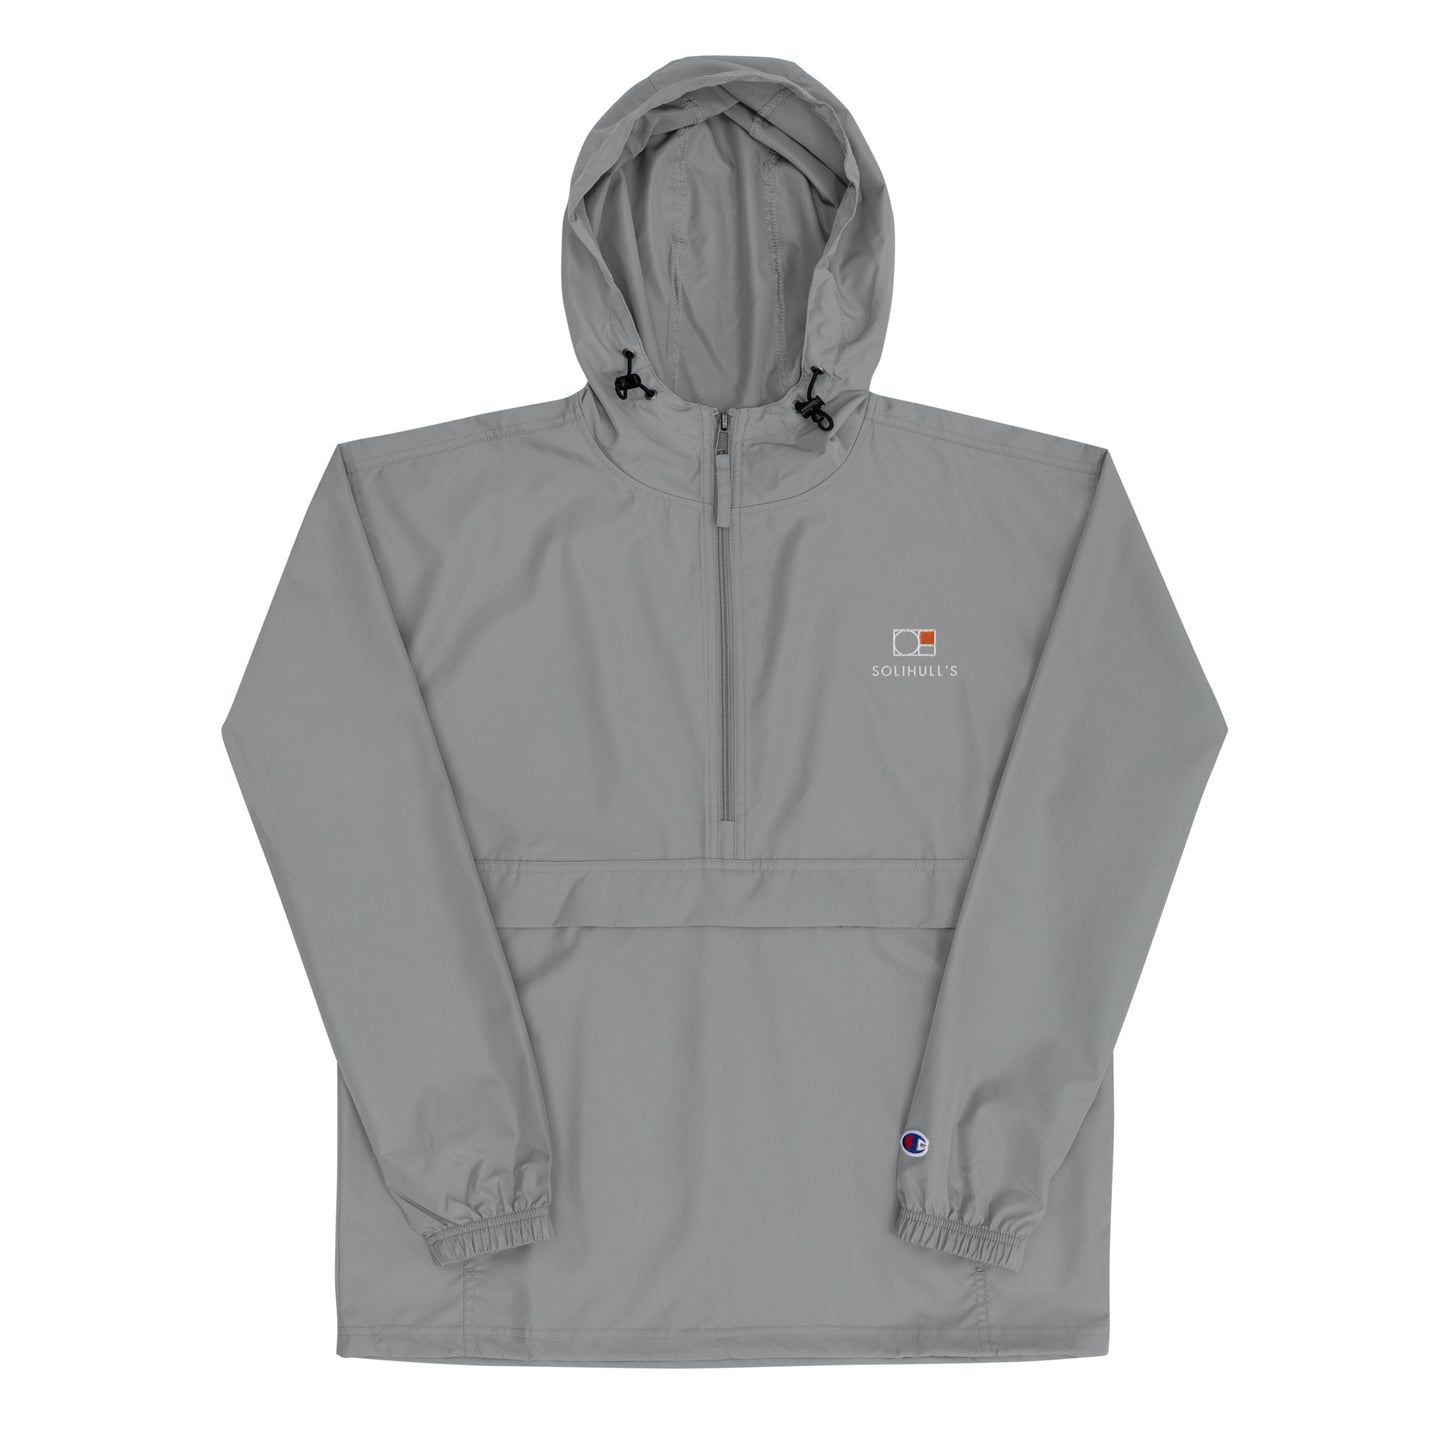 Solihull’s/Champion Packable Jacket